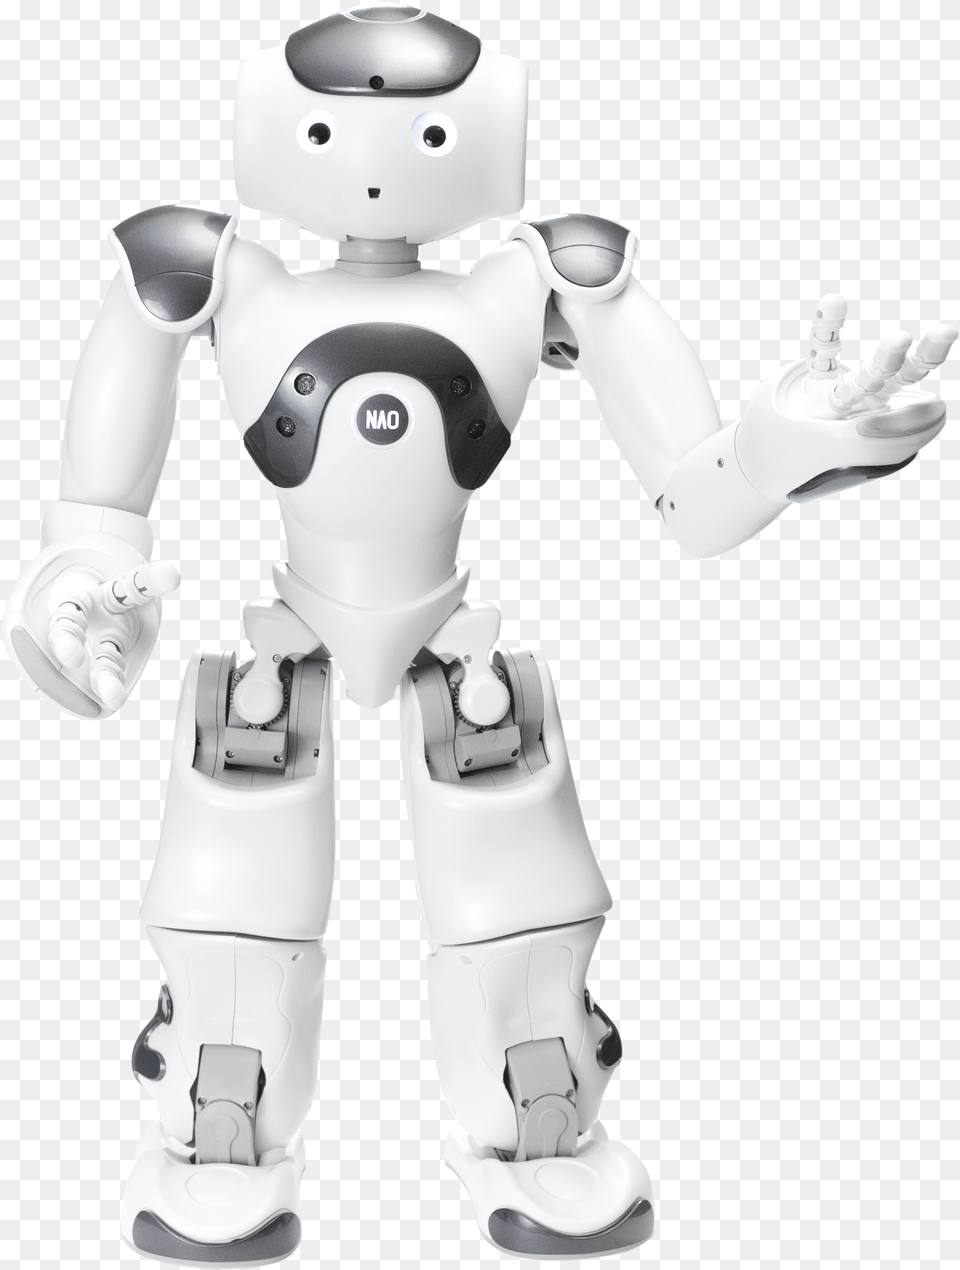 Robot Human Interaction Nao Robot Black Background Free Png Download